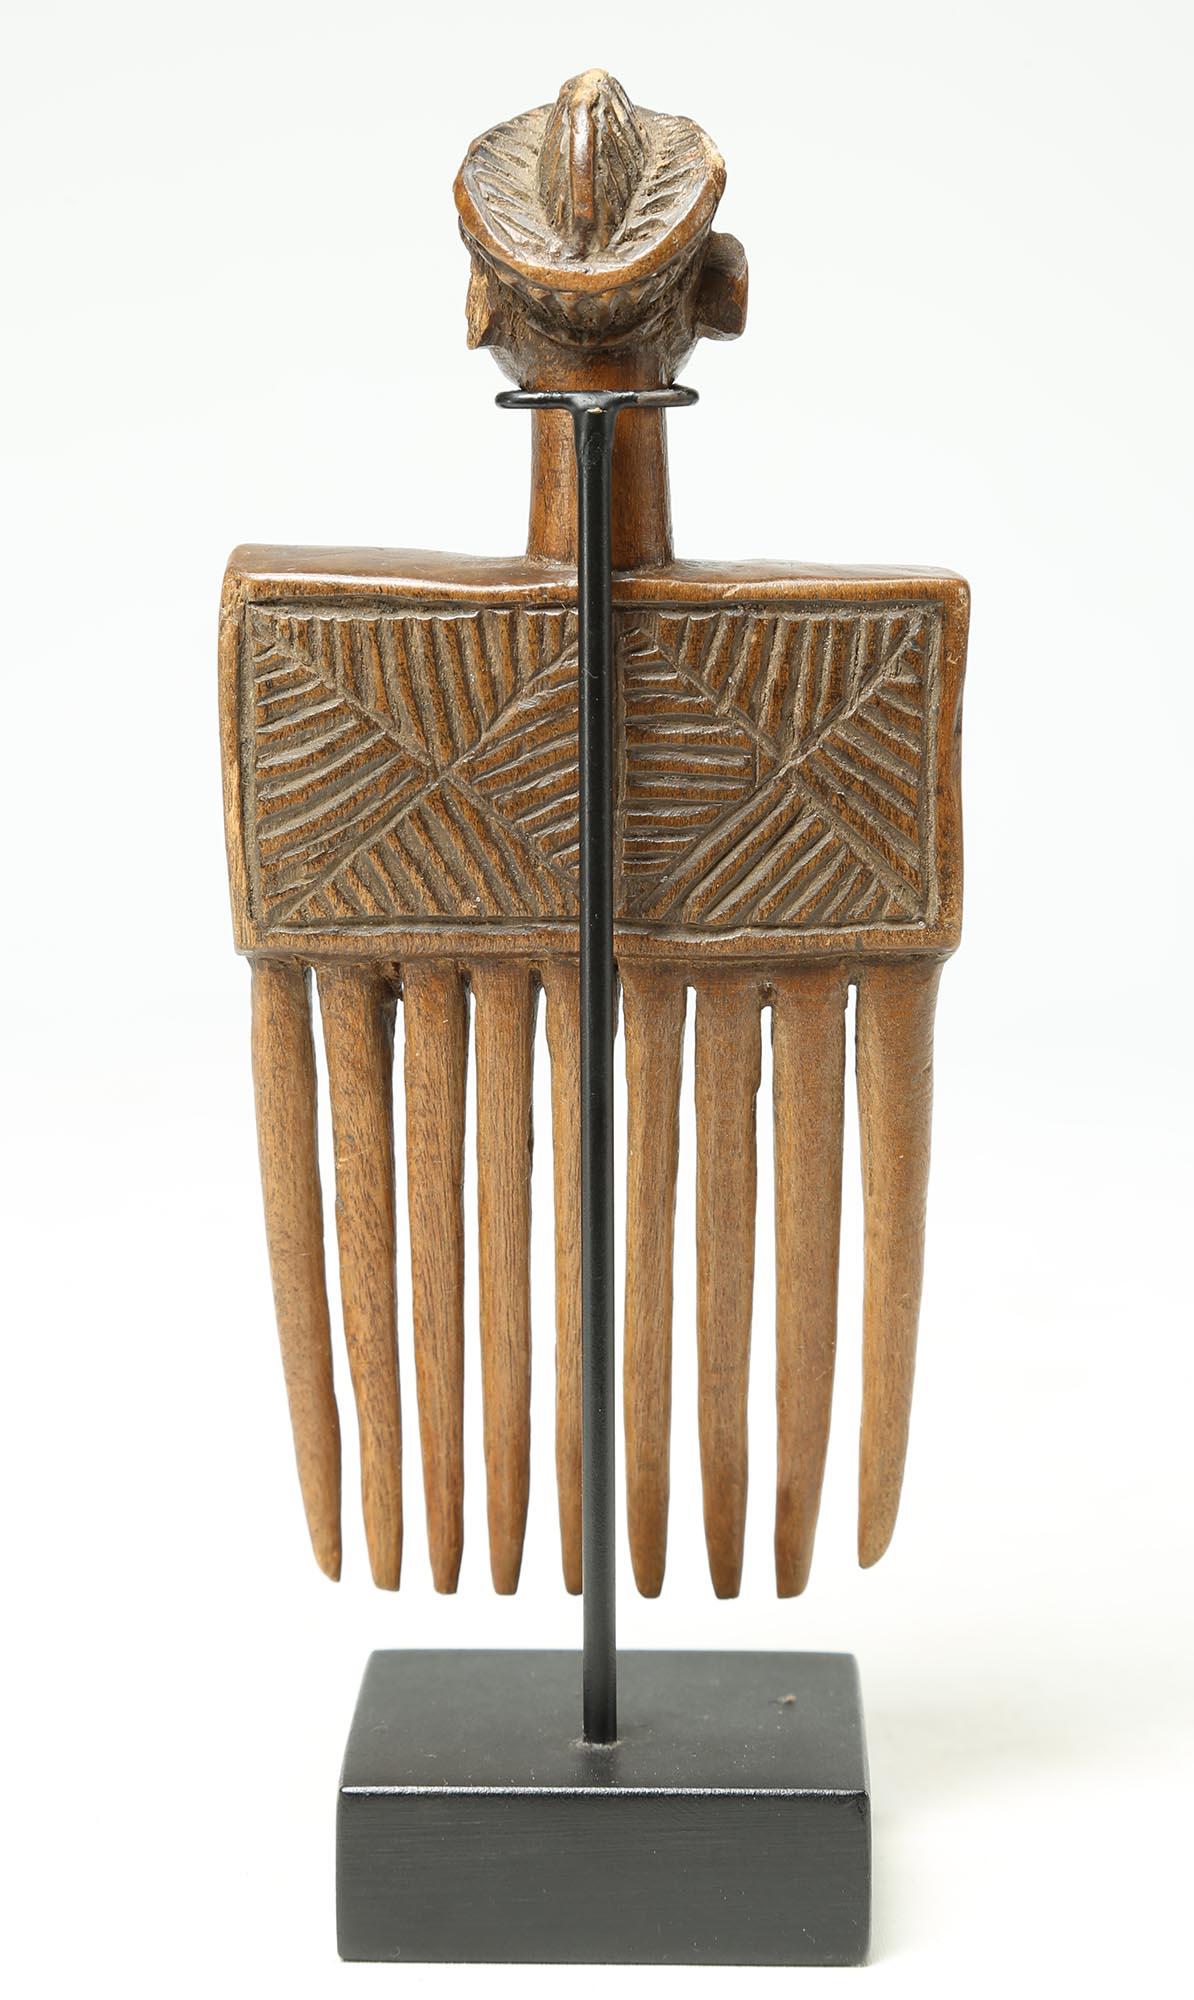 Chokwe Personal Comb Angola Congo Early 20th Century African Tribal Art In Good Condition For Sale In Santa Fe, NM